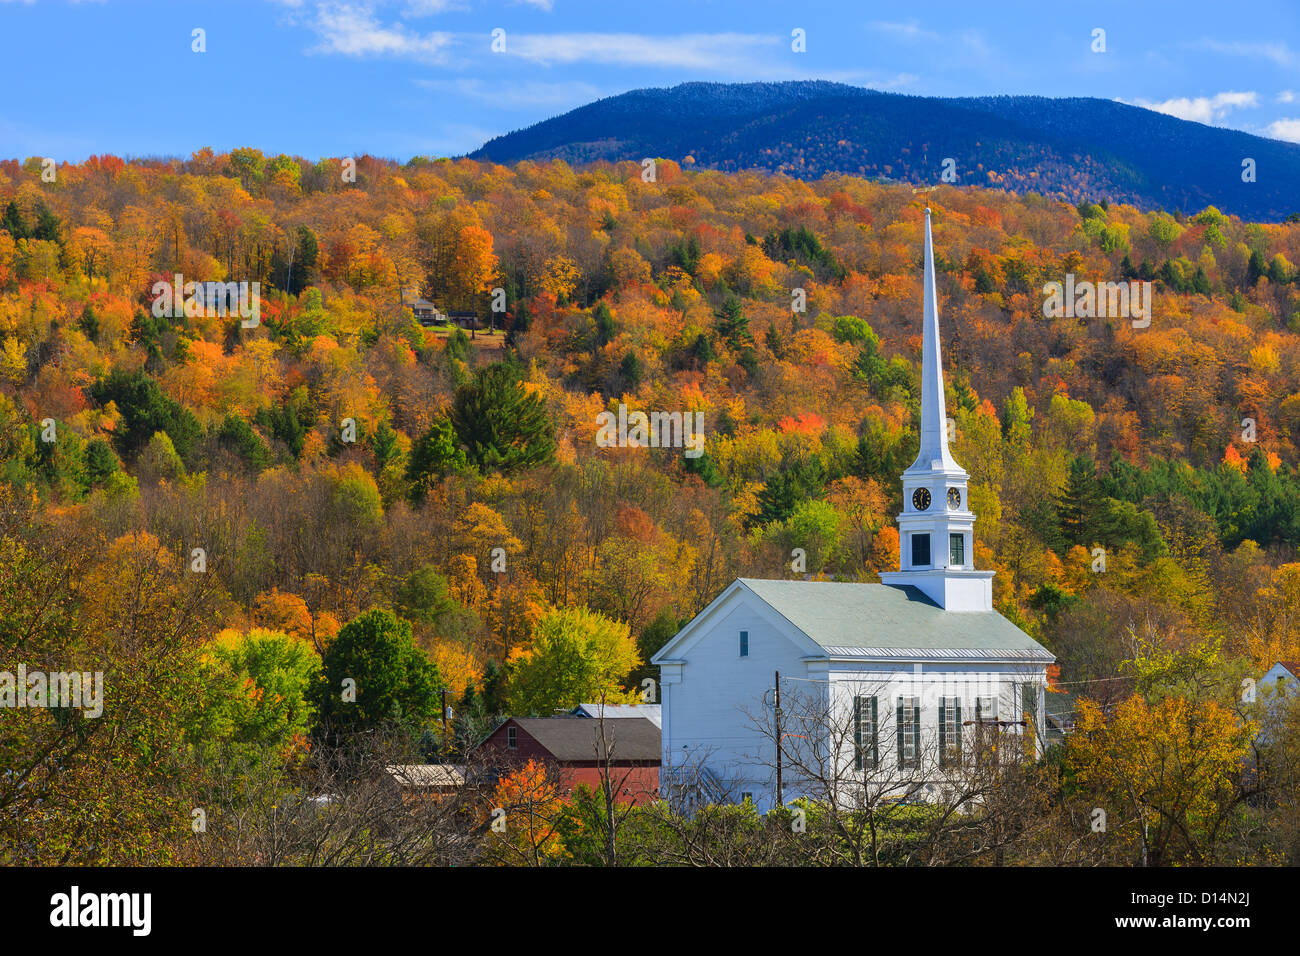 The famous white Community Church, in Stowe, Vermont. Stock Photo